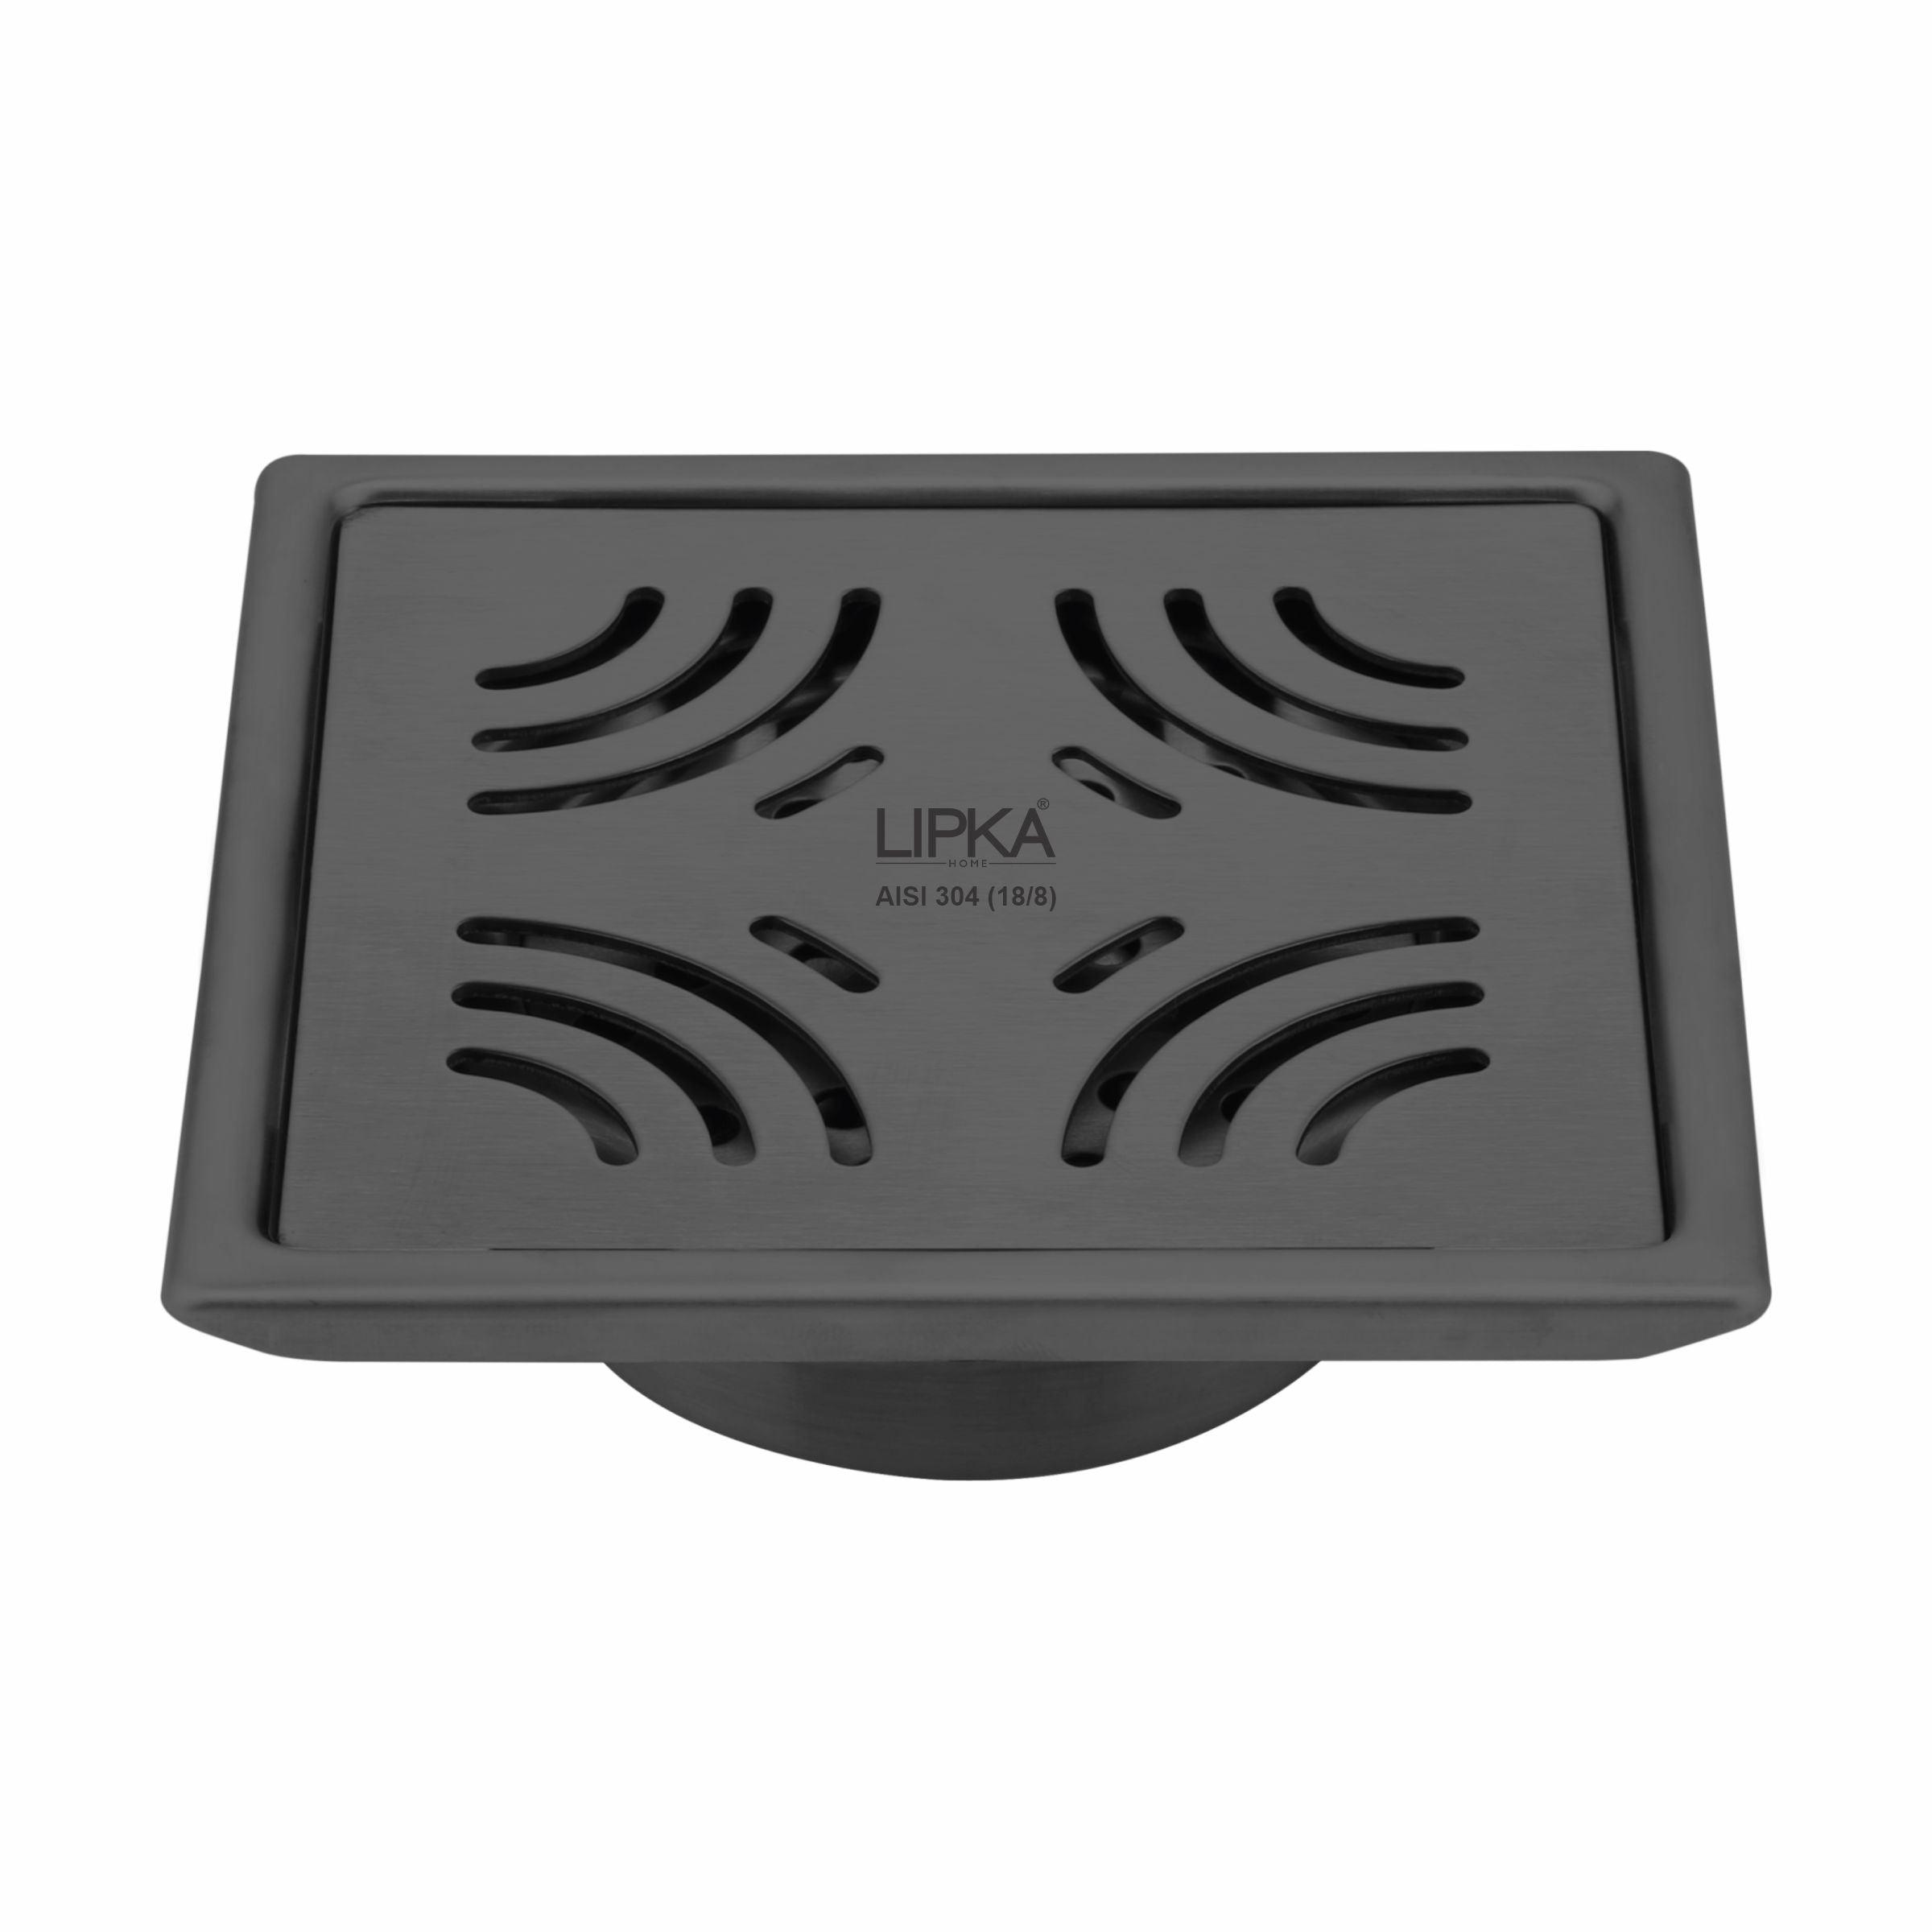 Purple Exclusive Square Floor Drain in Black PVD Coating (6 x 6 Inches) with Cockroach Trap